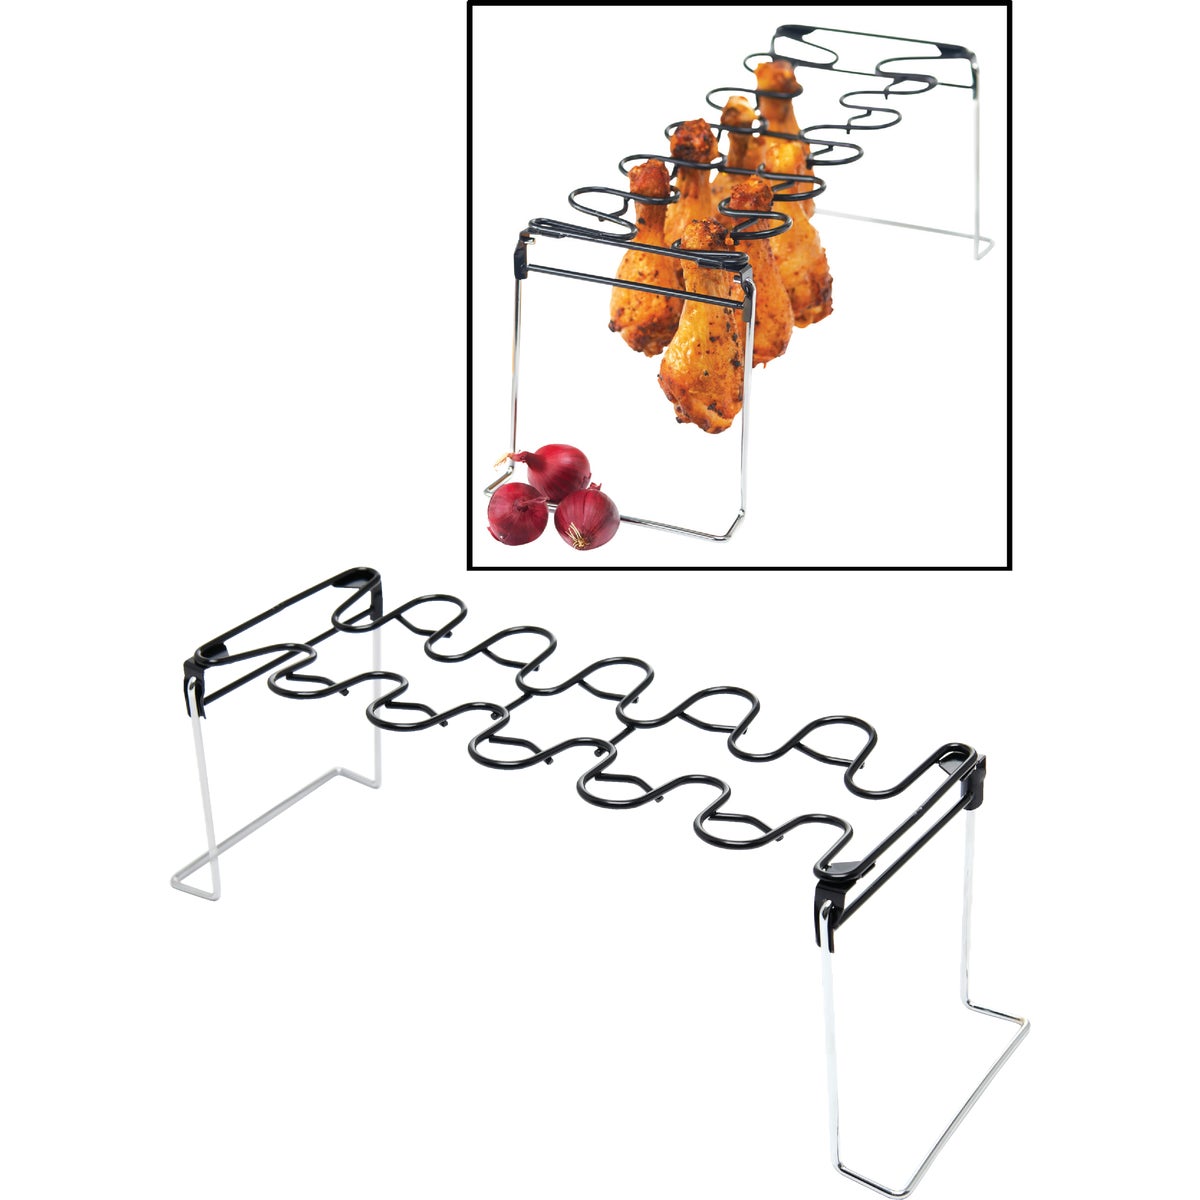 Item 800800, Nonstick coated wire wing and leg rack with folding legs.